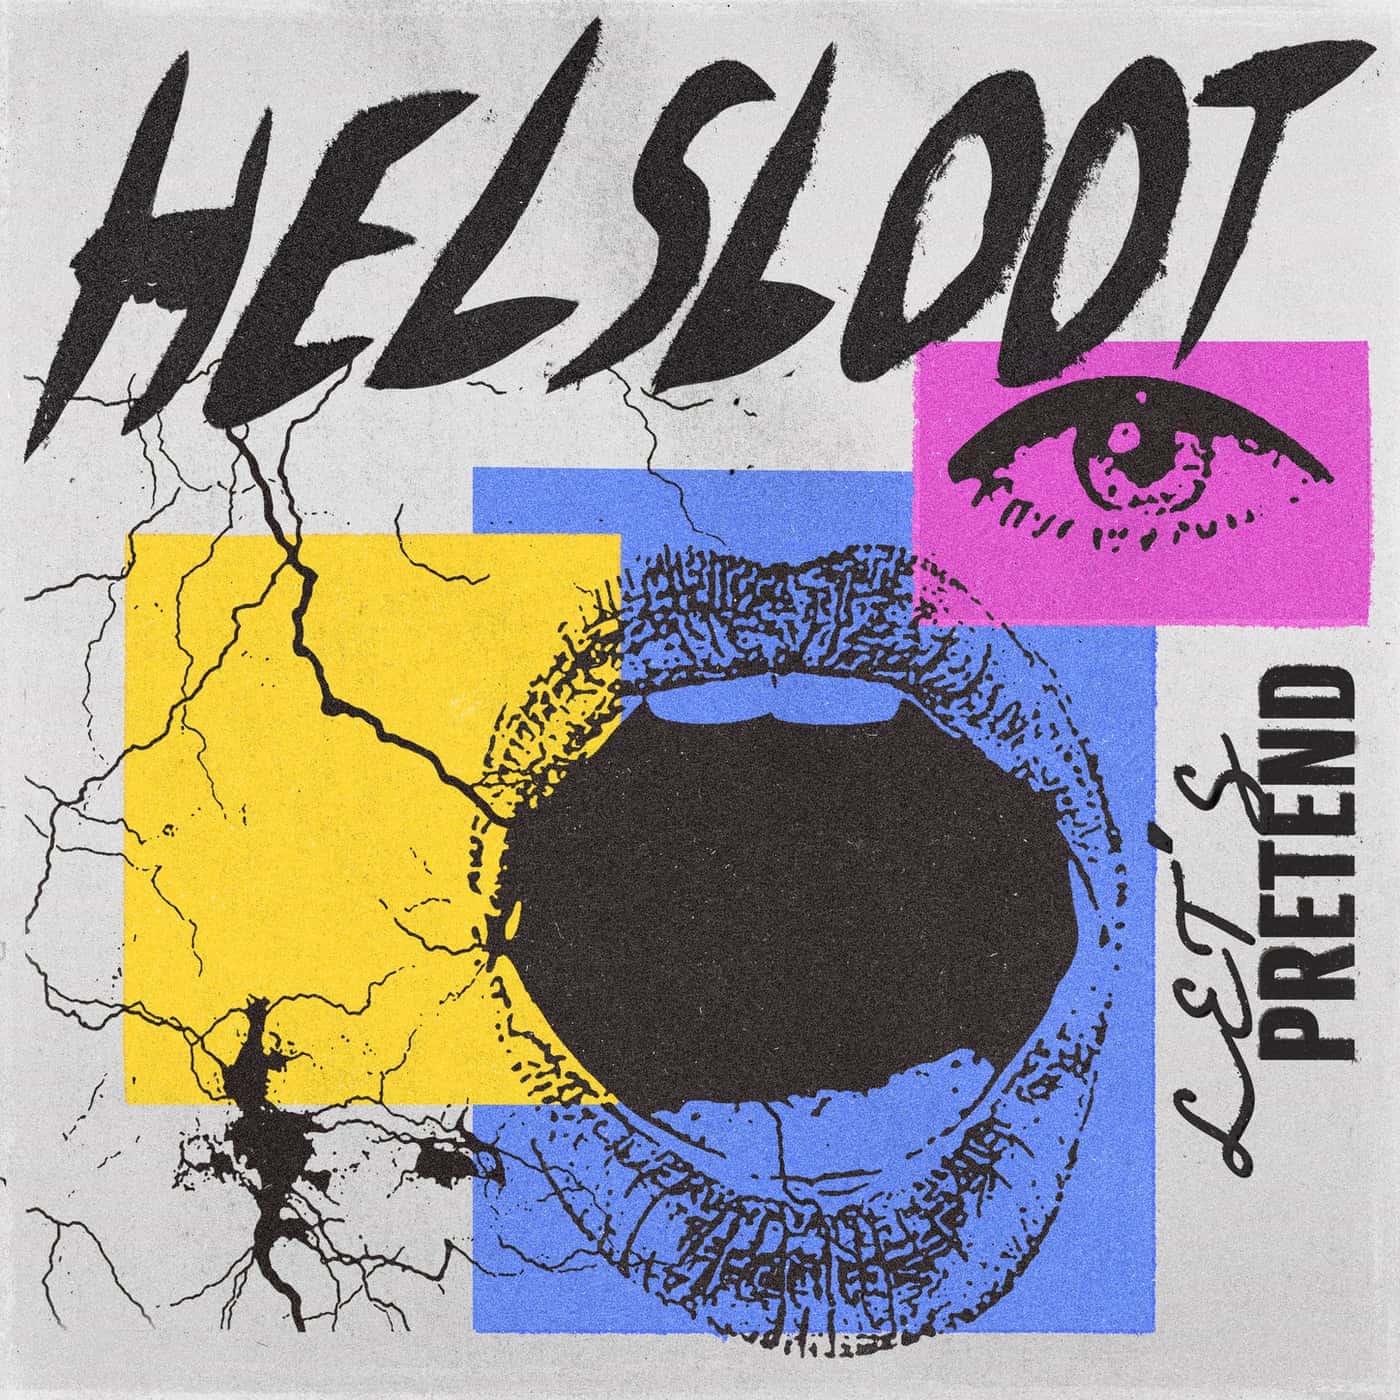 Download Helsloot - Let's Pretend (Extended Mix) on Electrobuzz